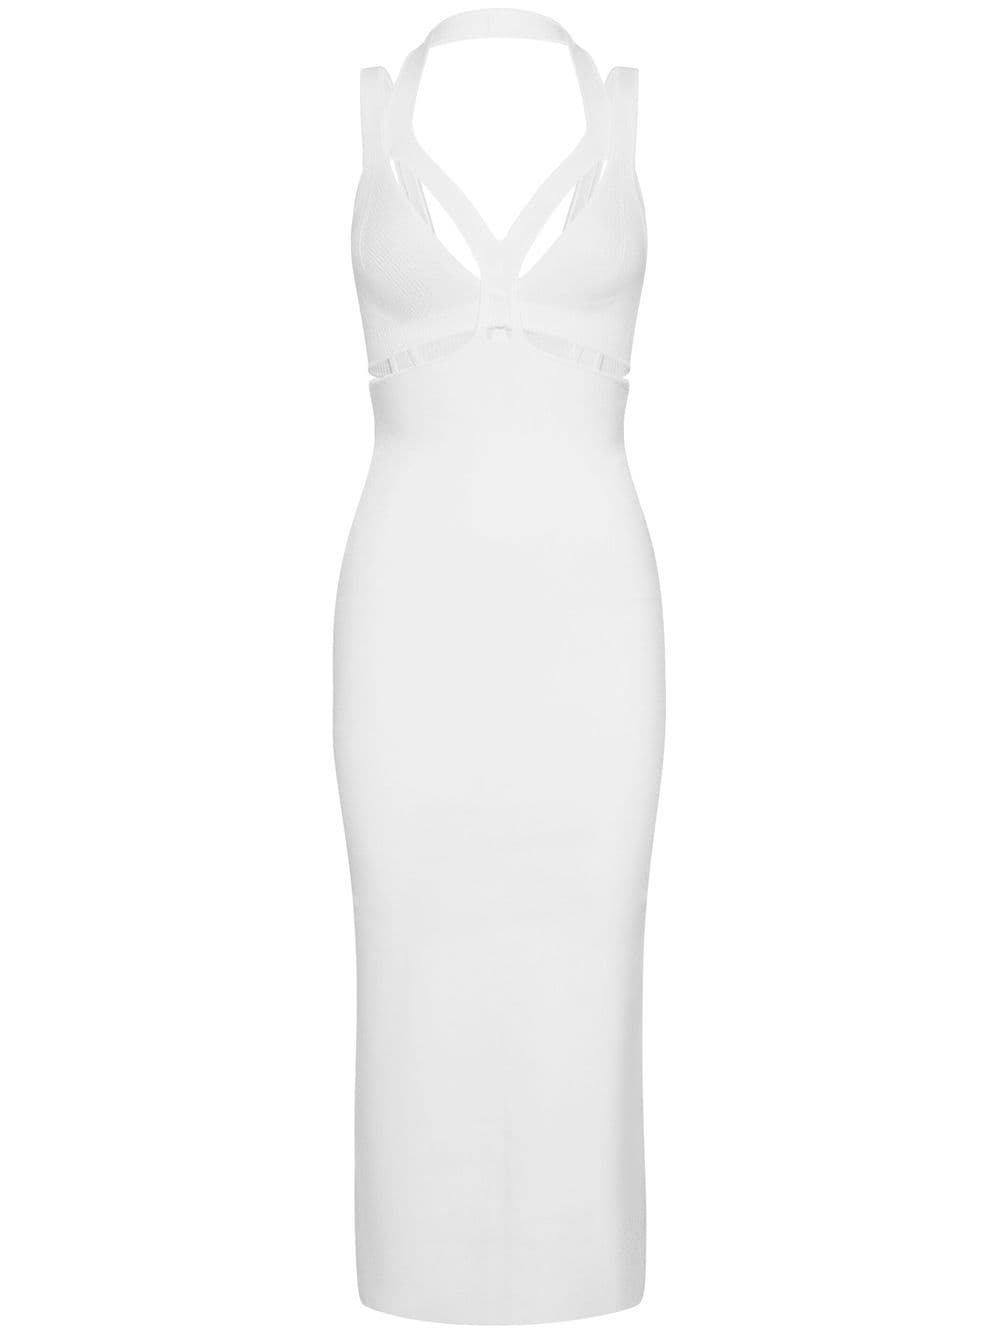 Dion Lee Interlink cut-out maxi dress - White